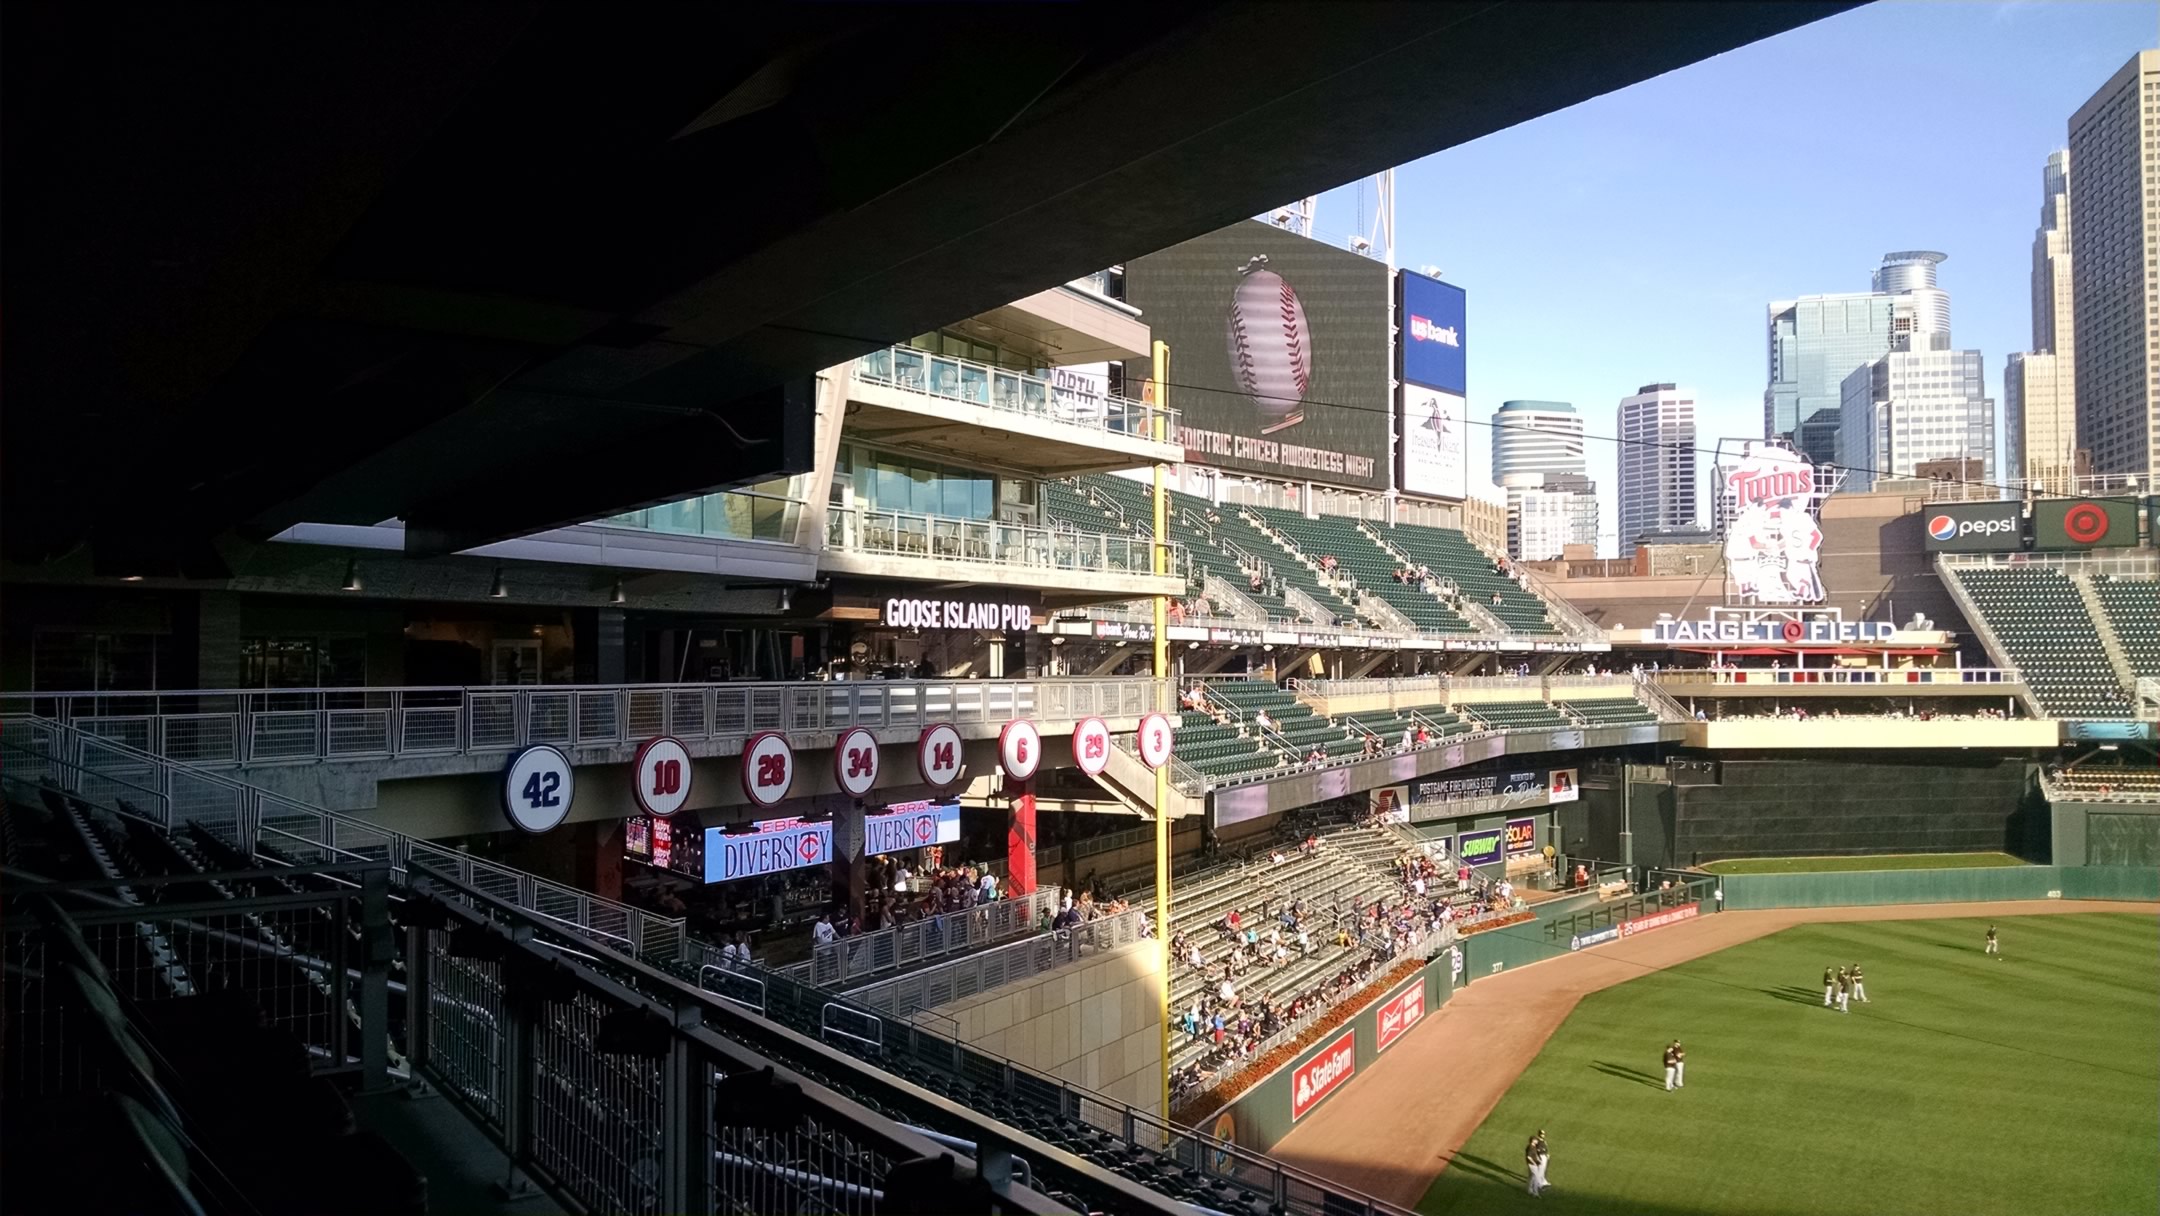 Shaded Seats at Target Field - Find Twins Tickets in the Shade